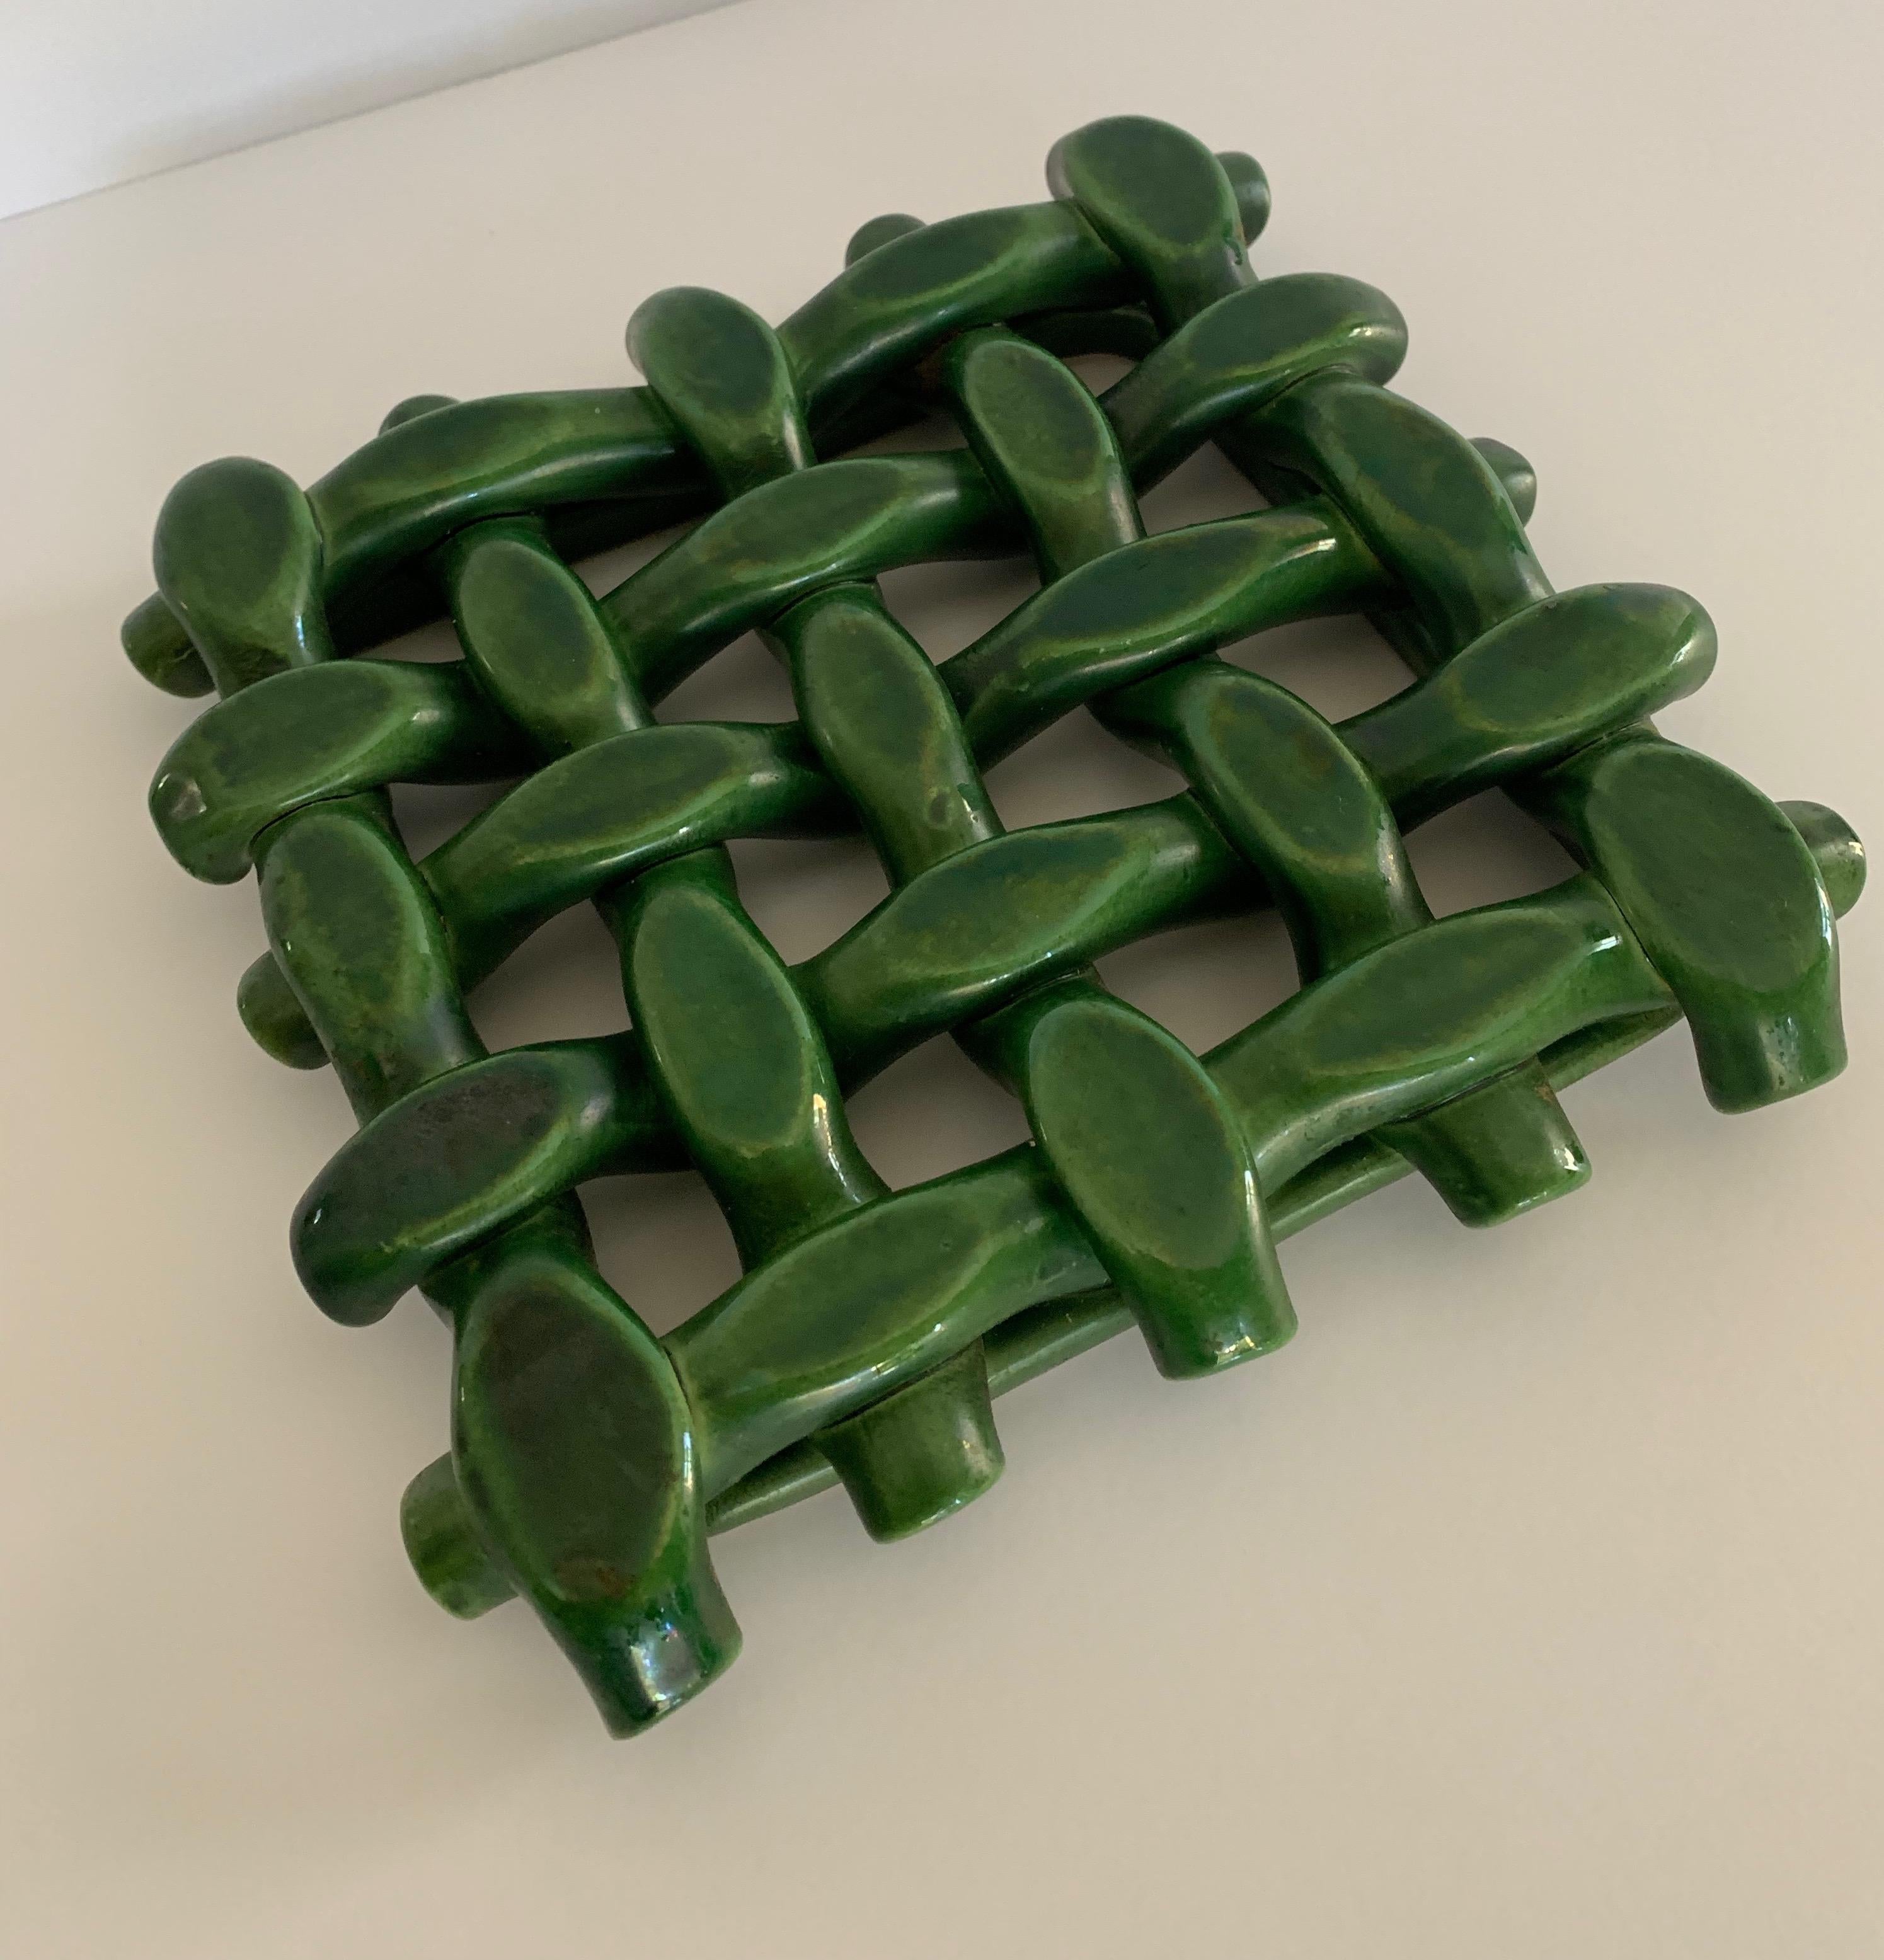 Take the heat off with this attractive green trivet with a lattice fit for a pie! simple and sophisticated for the baker with style.